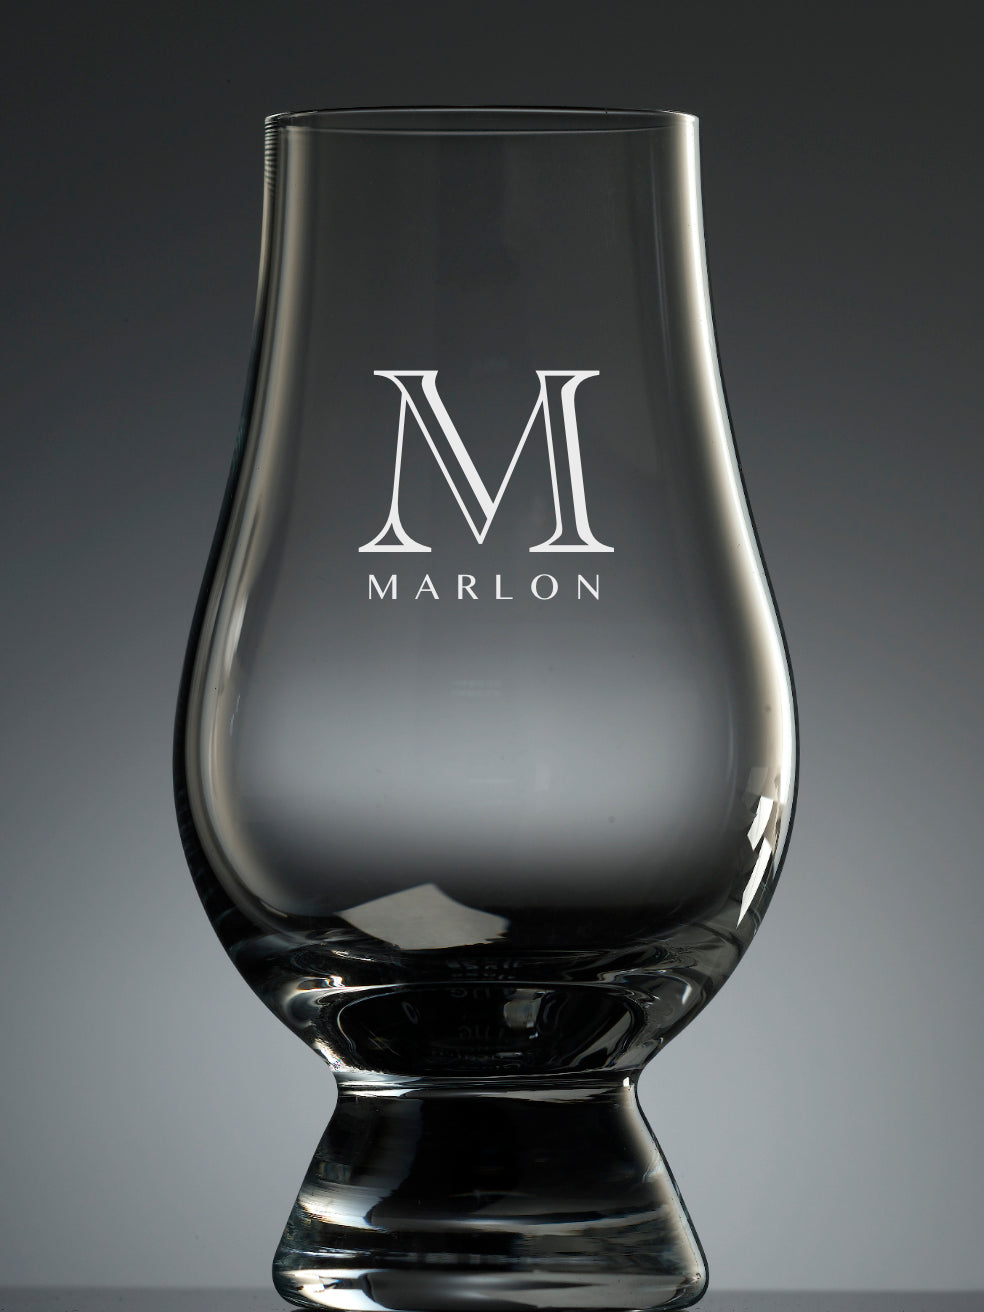 Make the Glencairn Whisky Glass personal with this monogrammed version. The first letter and full name will be etched using a laser. Please allow two weeks for completion plus deliver.